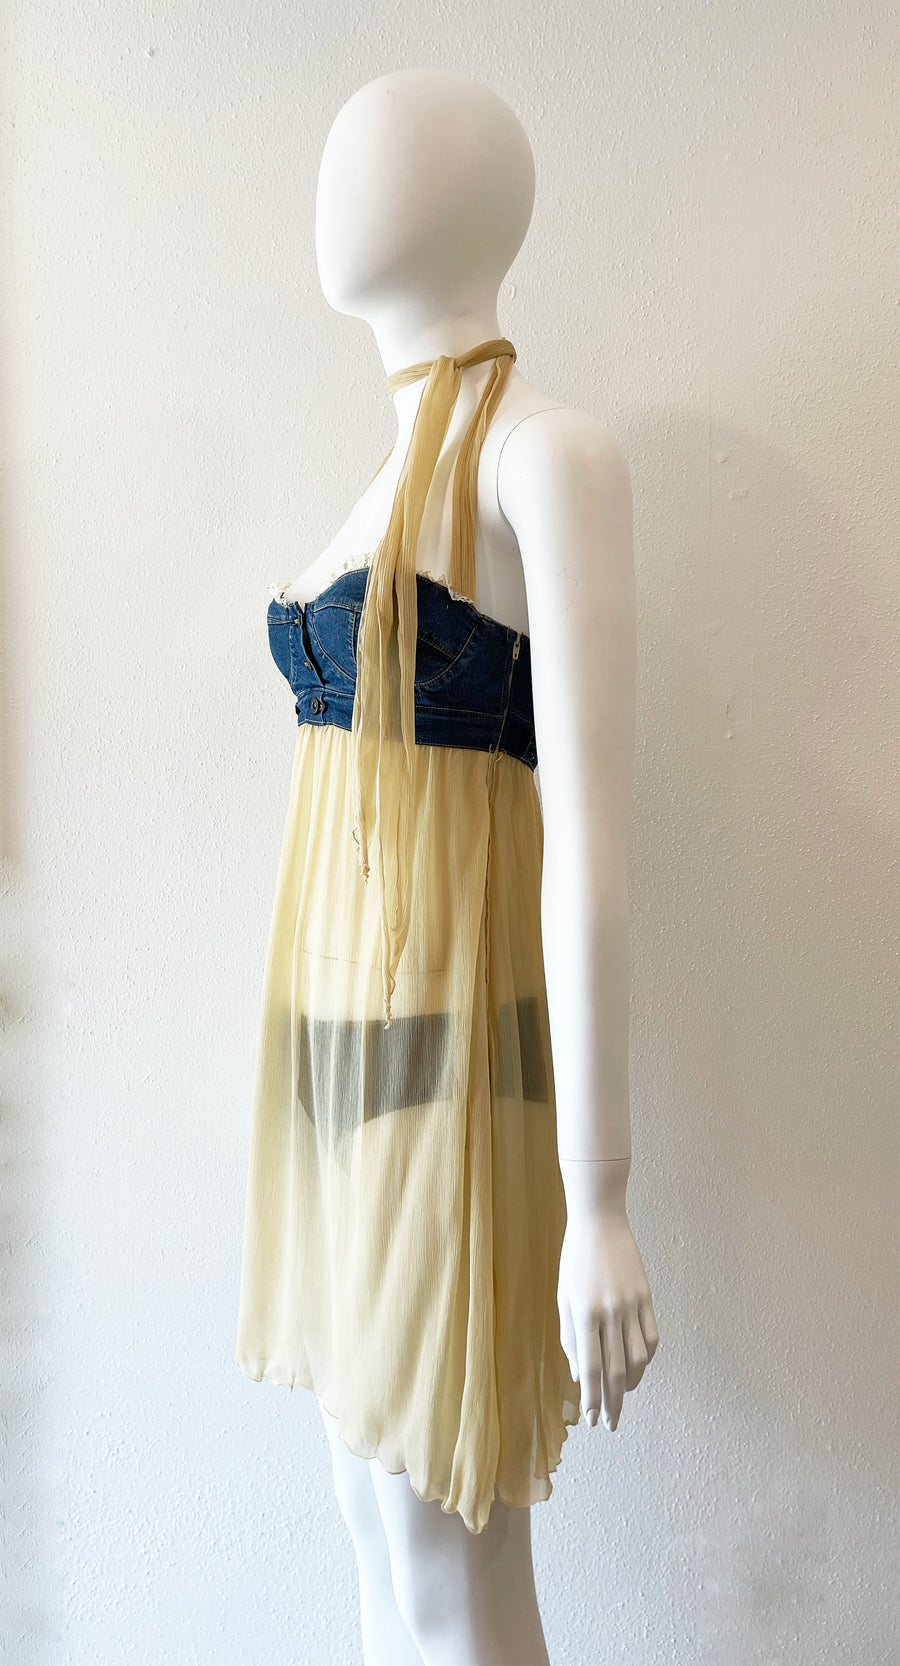 D&G Sheer Dress with Bustier